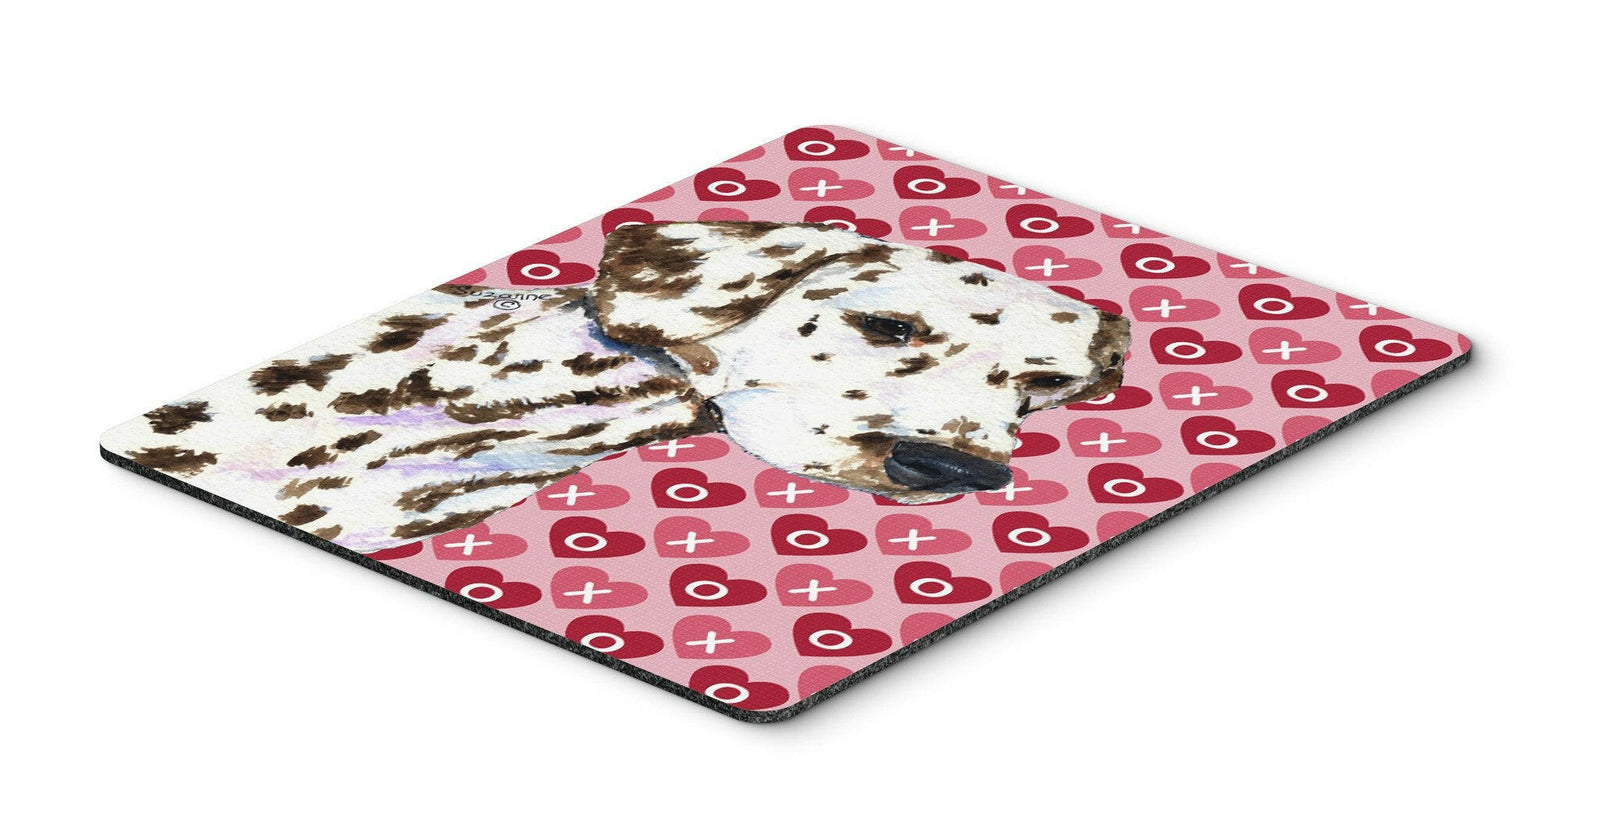 Dalmatian Hearts Love and Valentine's Day Portrait Mouse Pad, Hot Pad or Trivet by Caroline's Treasures